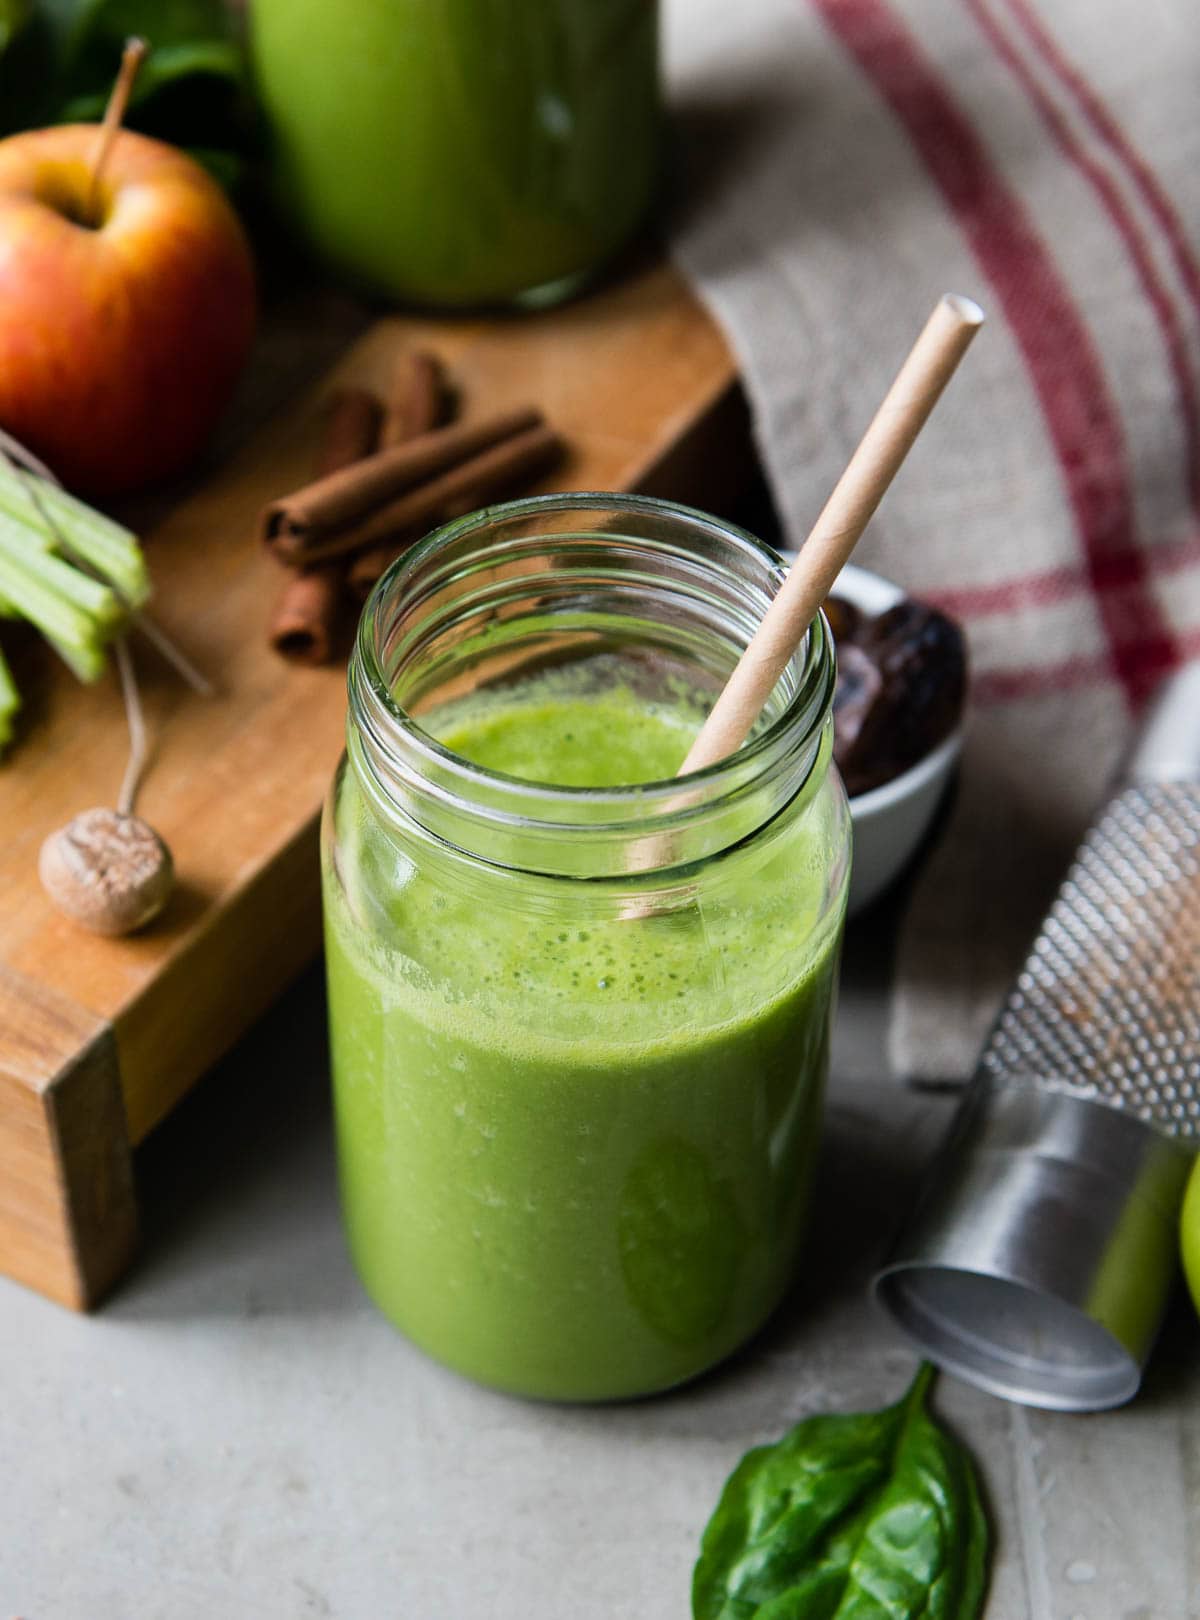 green smoothie in glass jar with paper straw.